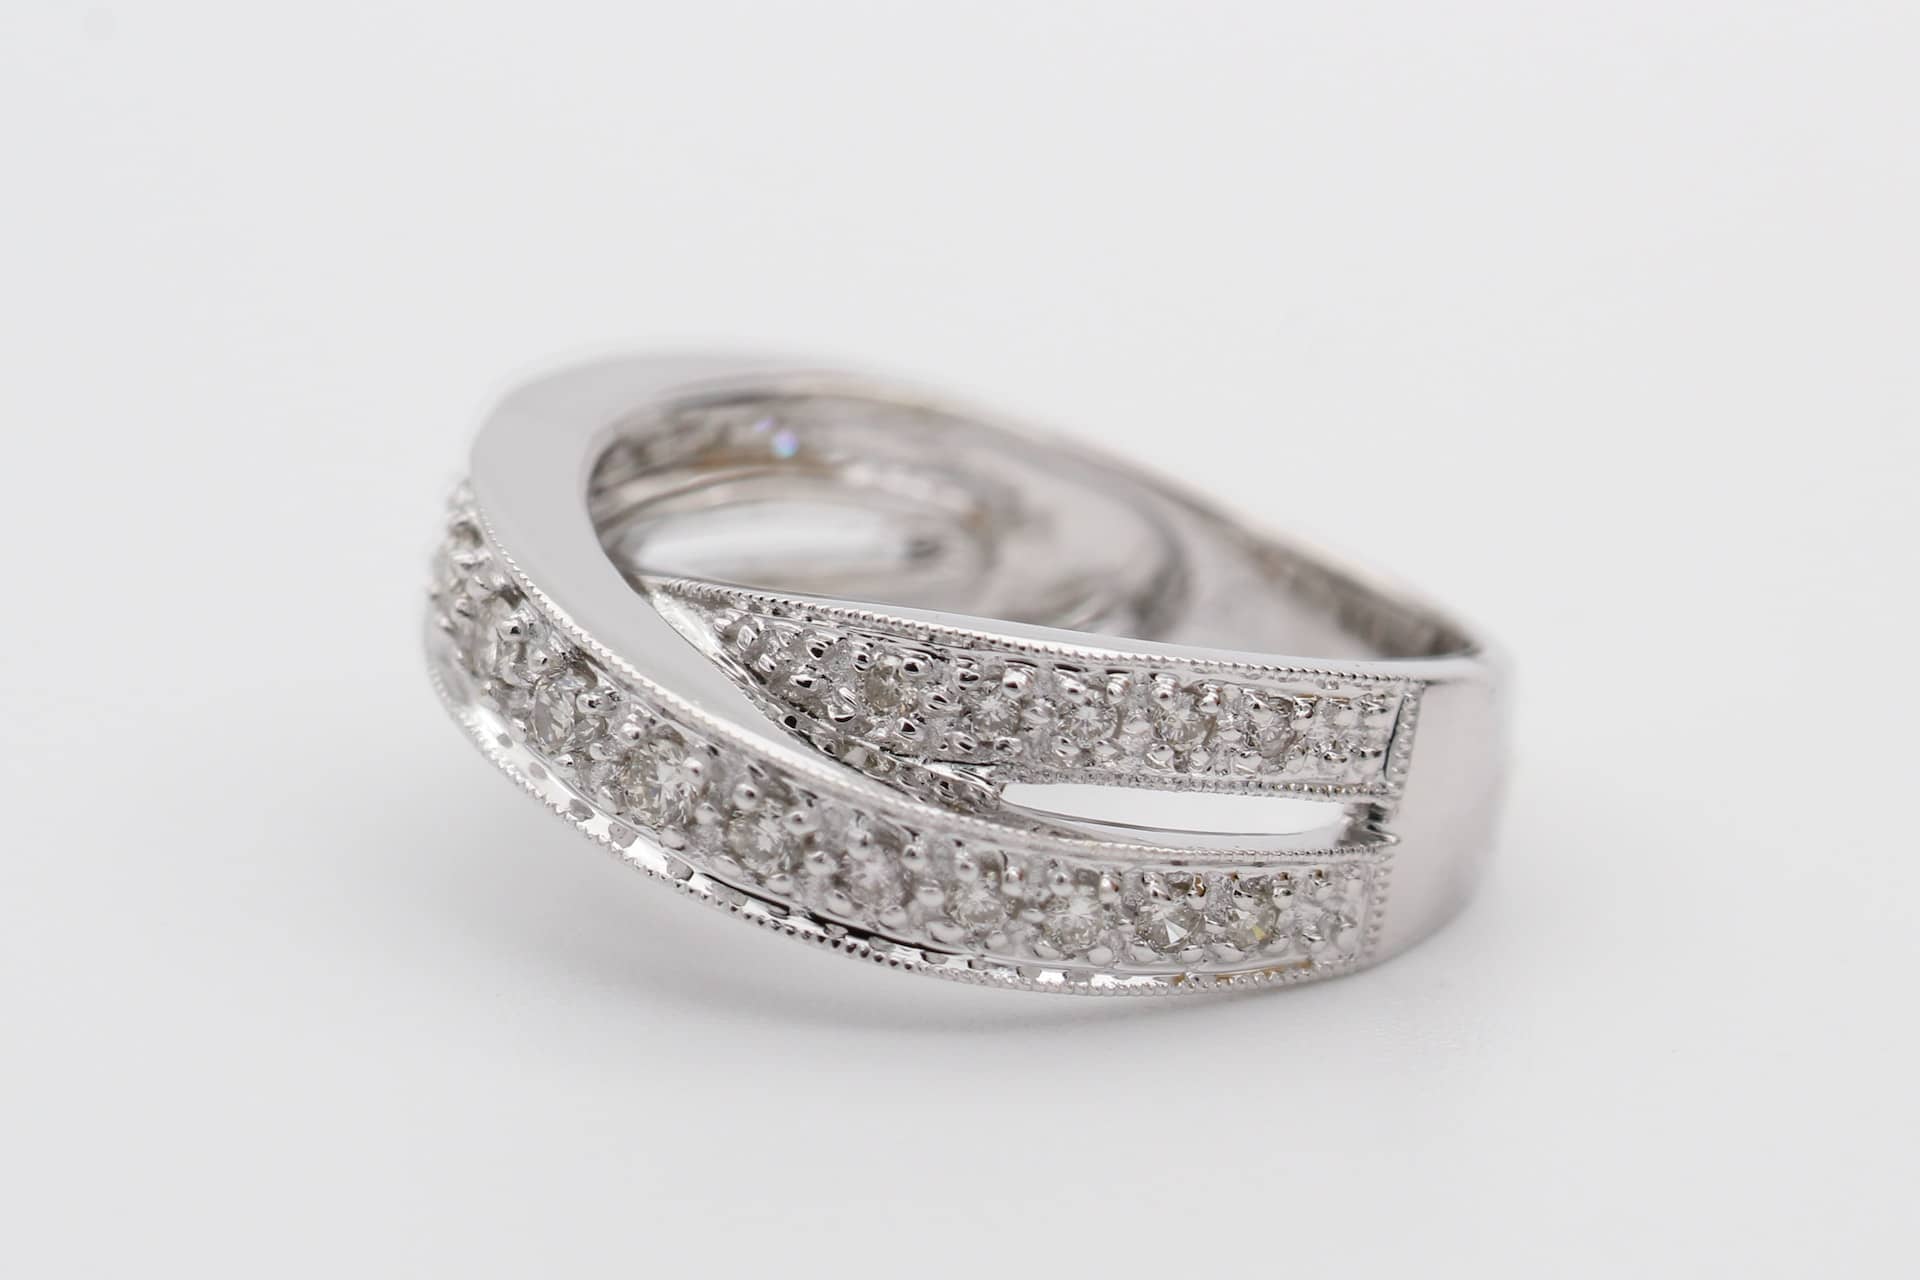 A silver double-loop diamond ring